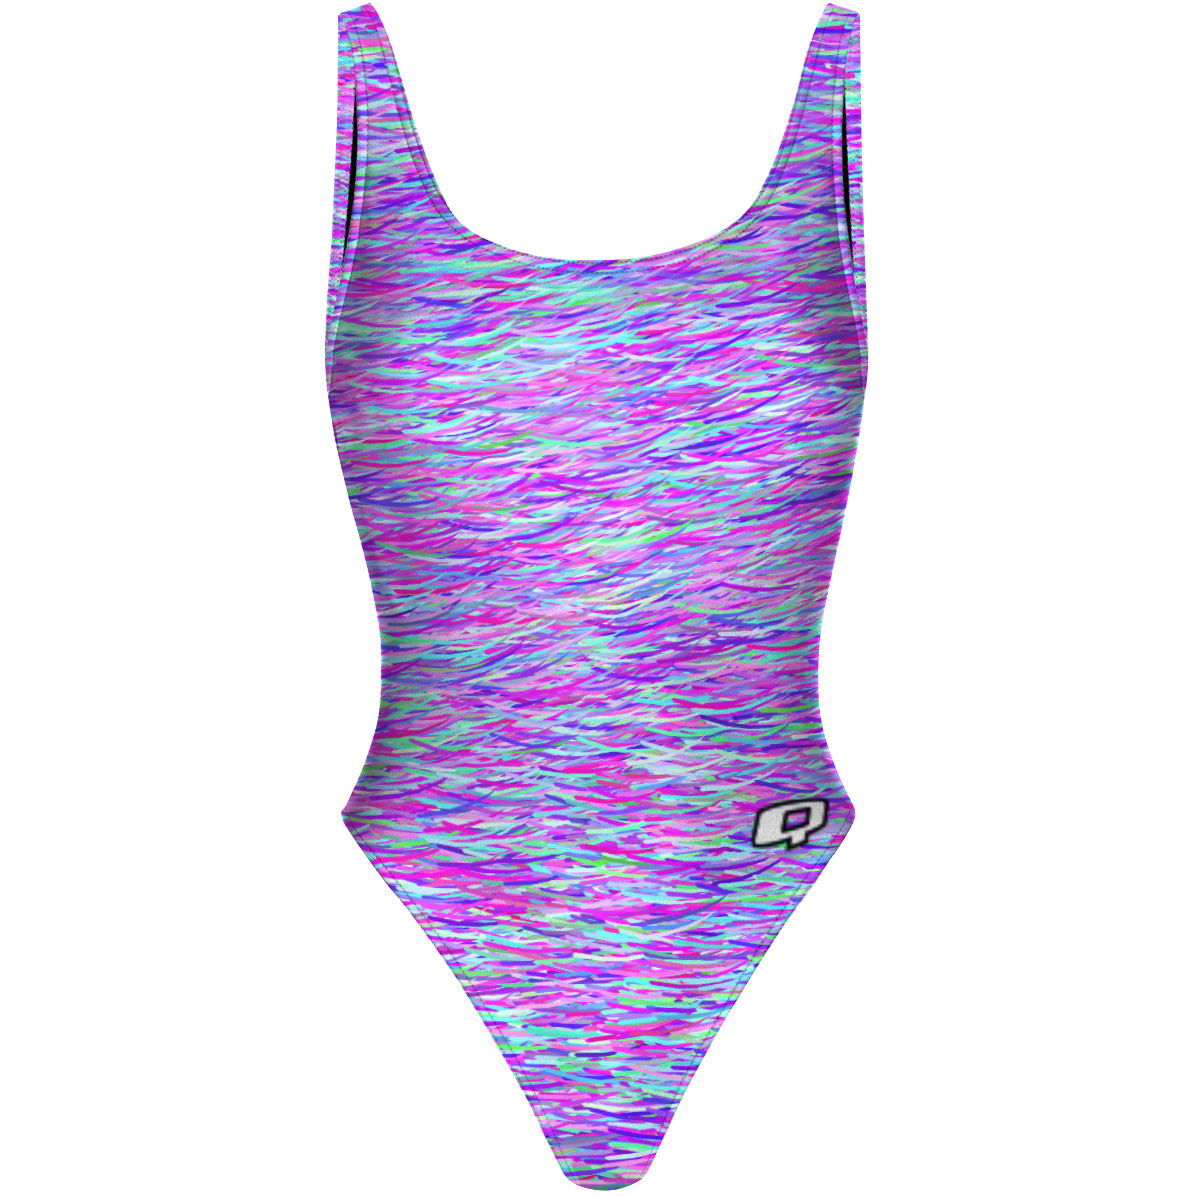 Coral Sea - High Hip One Piece Swimsuit